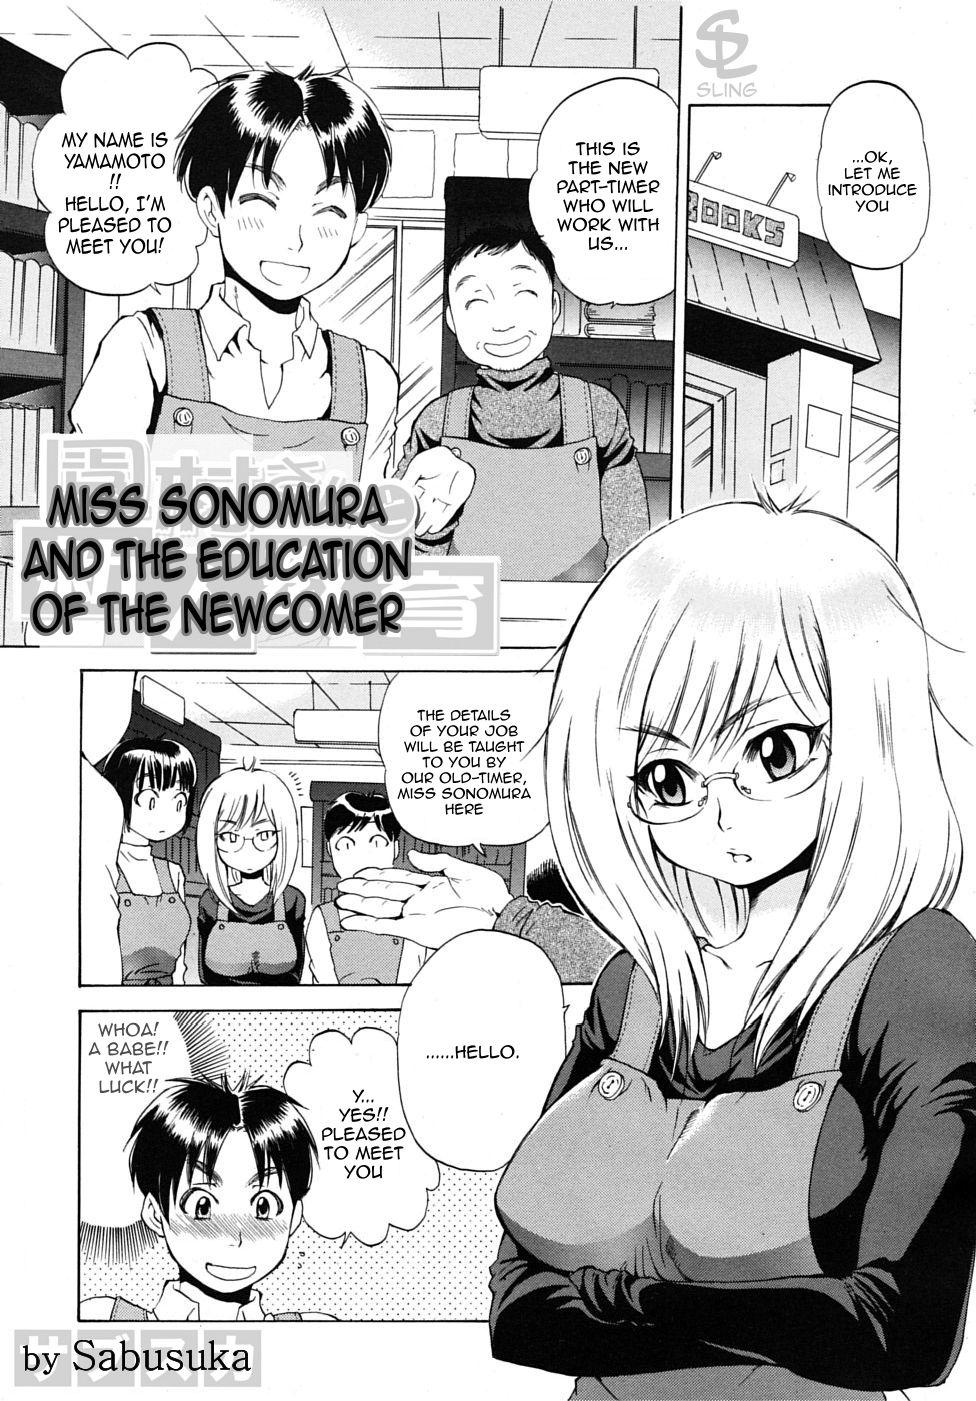 Miss Sonomura and the education of the newcomer 0